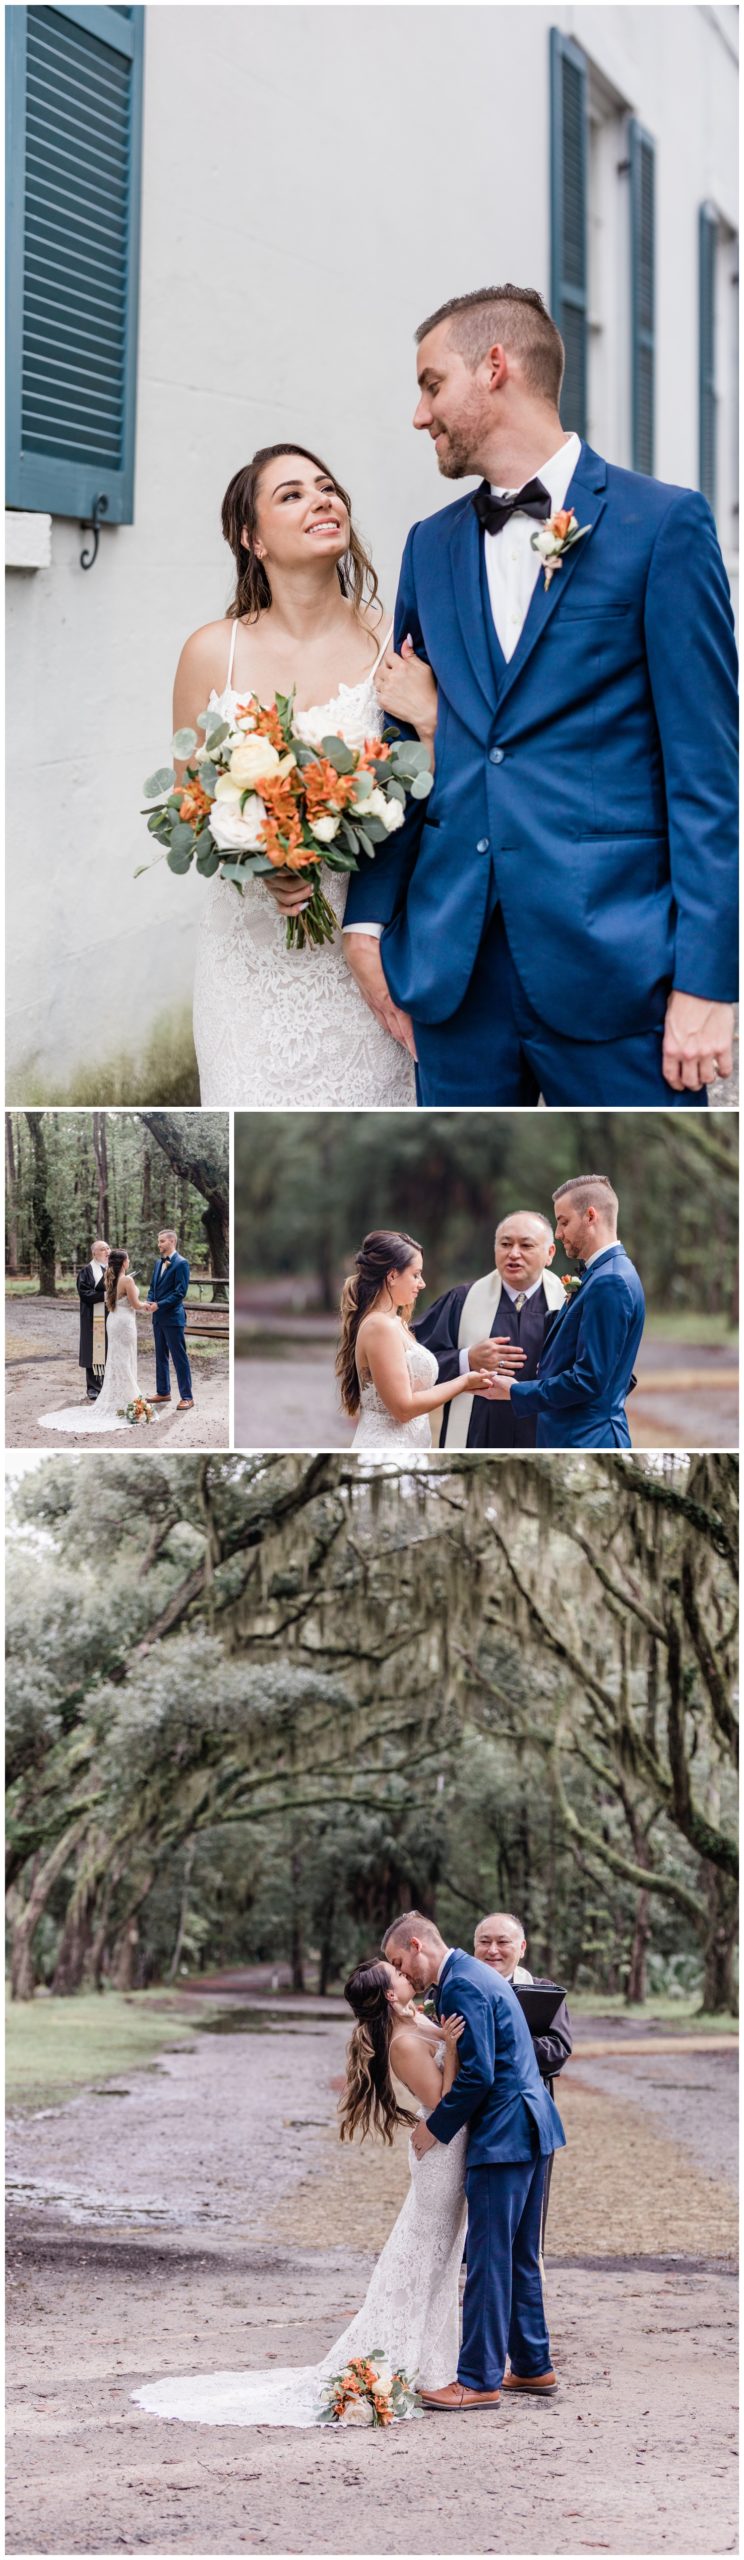 Eloping at Wormsloe - officiating by Reverend Joe - apt b photography